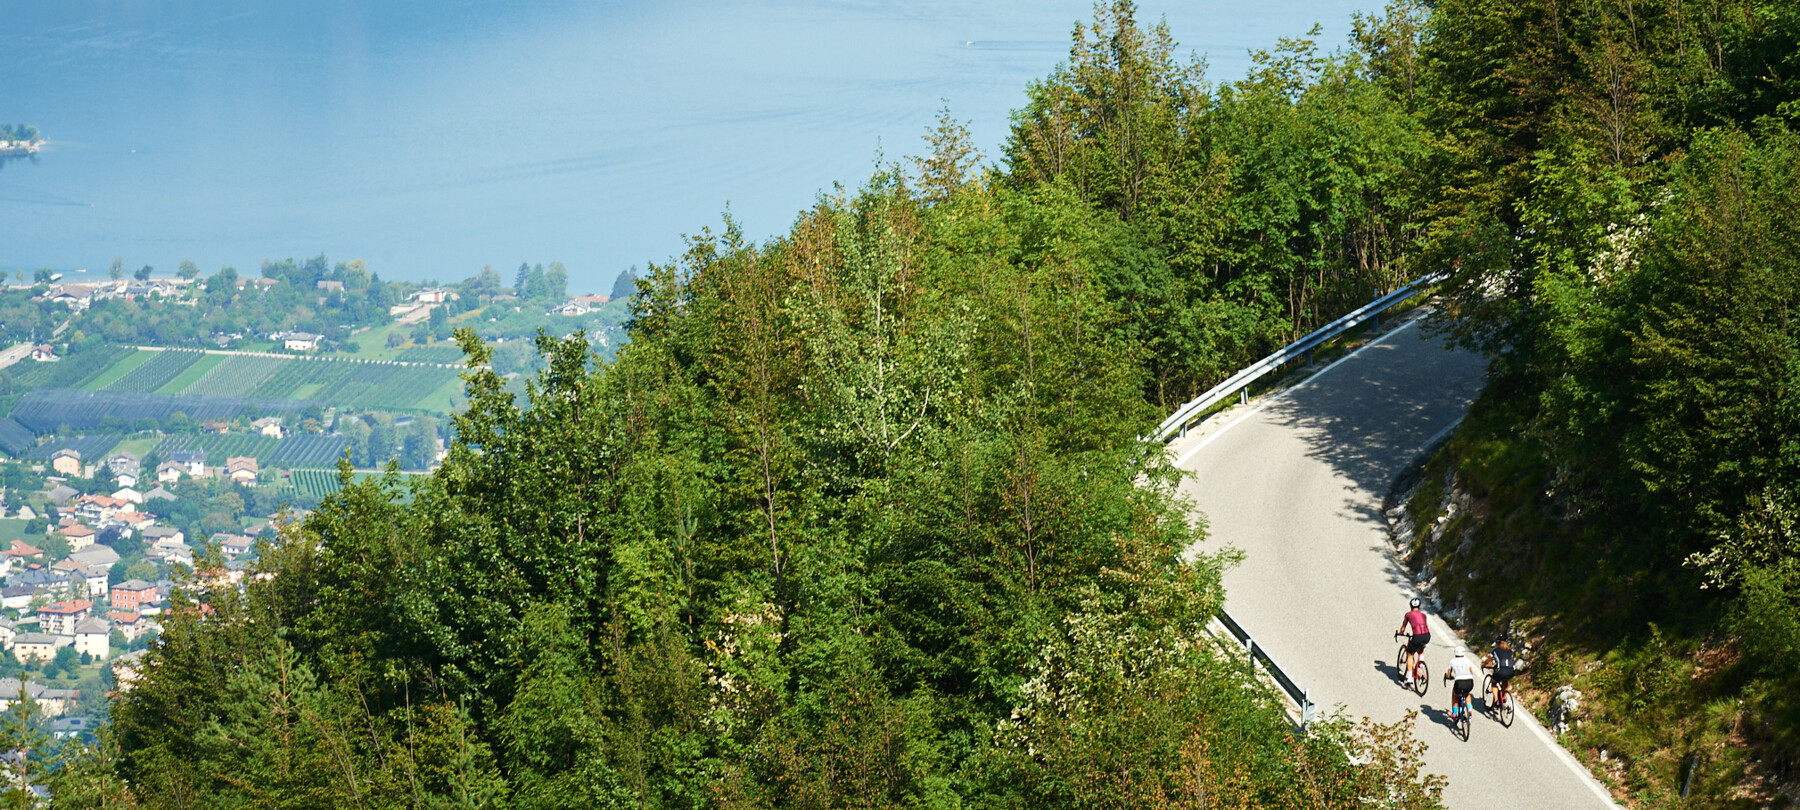 The legendary uphill climbs of Trentino, routes that made cycling history